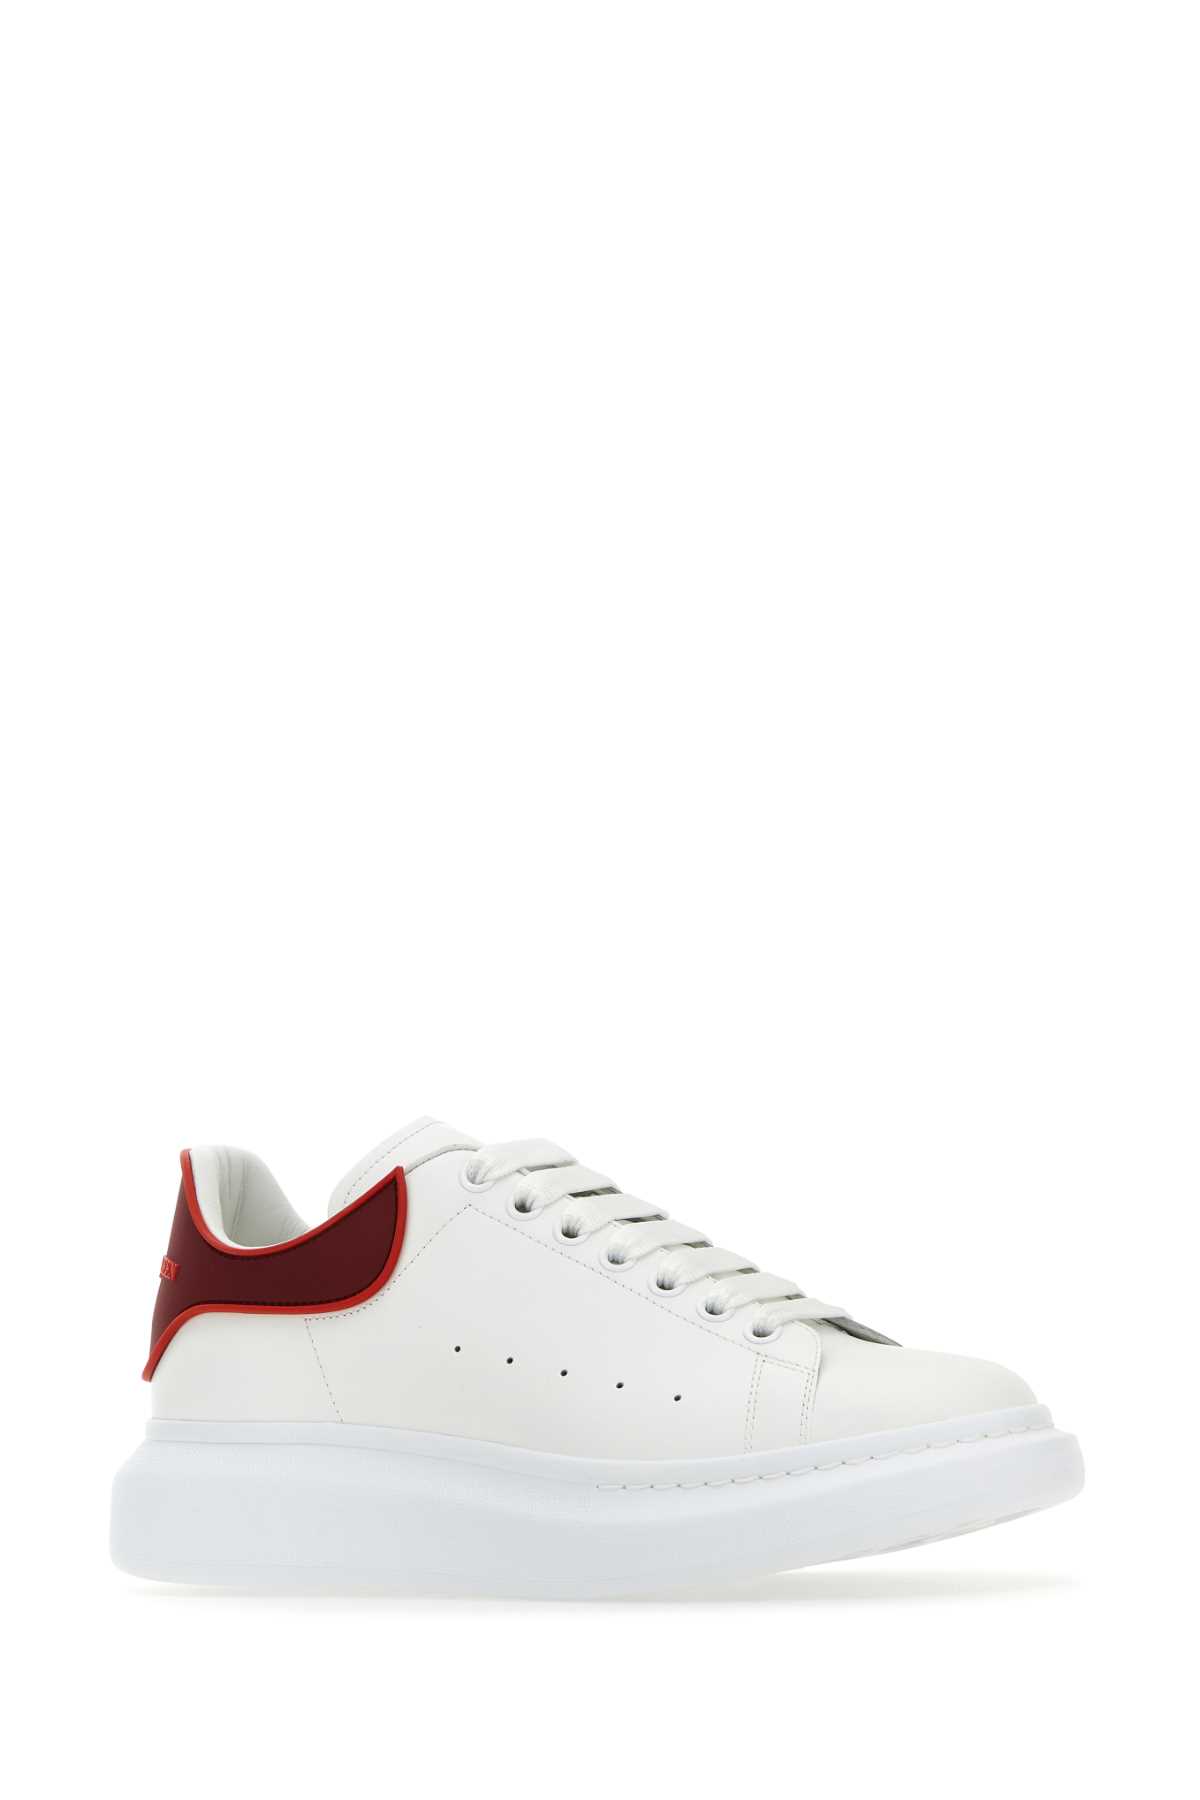 Alexander Mcqueen White Leather Sneakers With Red Rubber Heel In Whiteroredscared